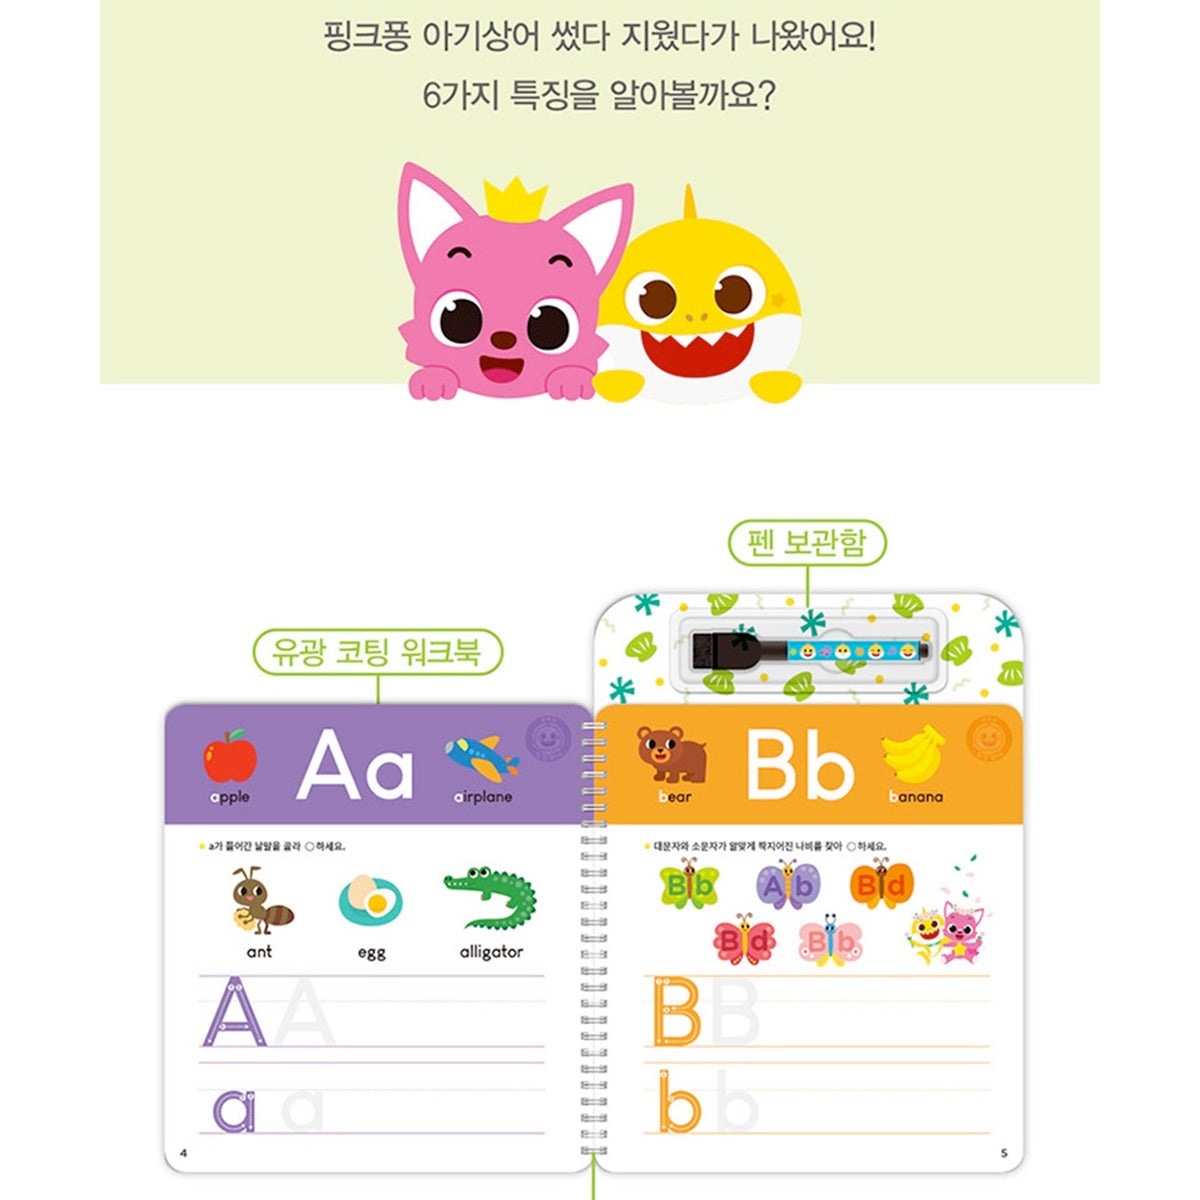 Pinkfong ABC Alphabet Note for Children freeshipping - K-ZONE STUDIO